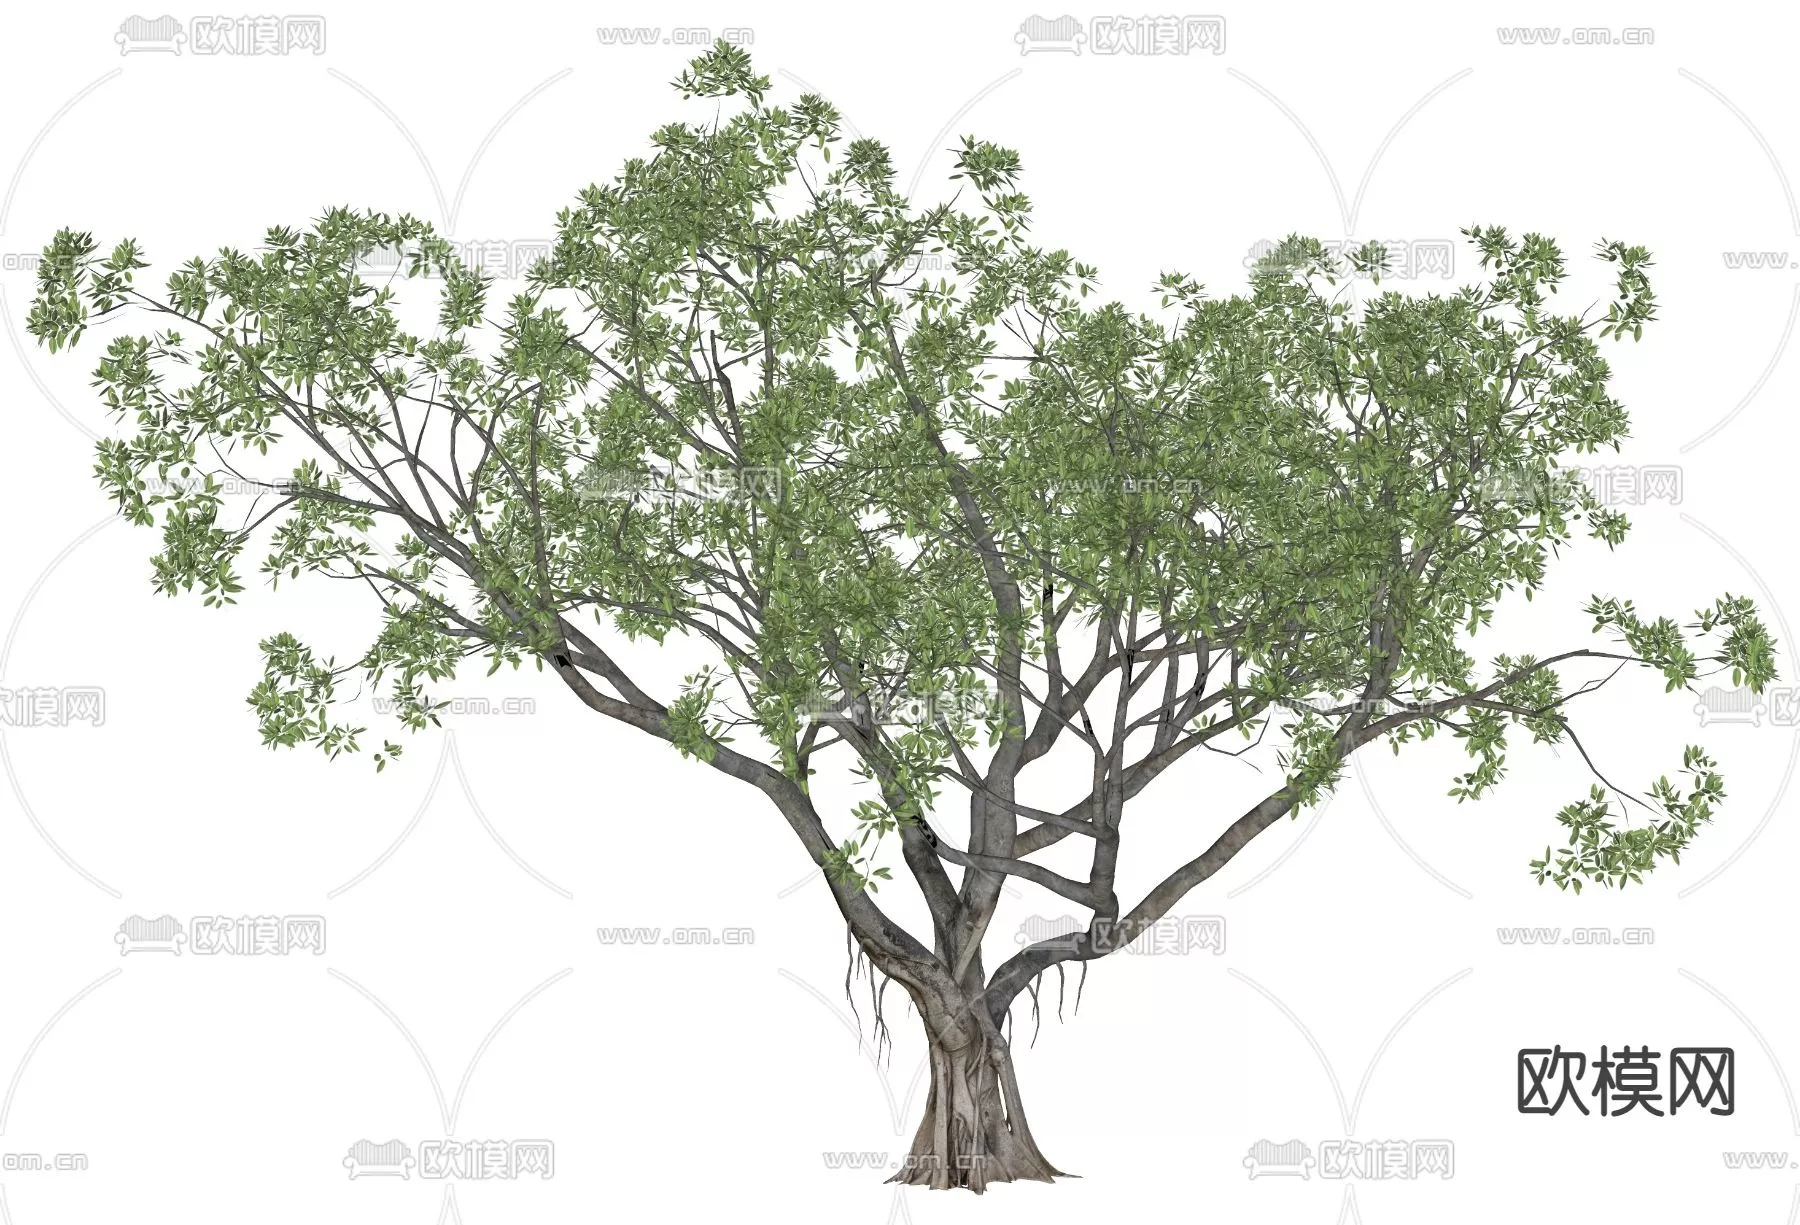 MODERN TREE - SKETCHUP 3D MODEL - VRAY OR ENSCAPE - ID15420